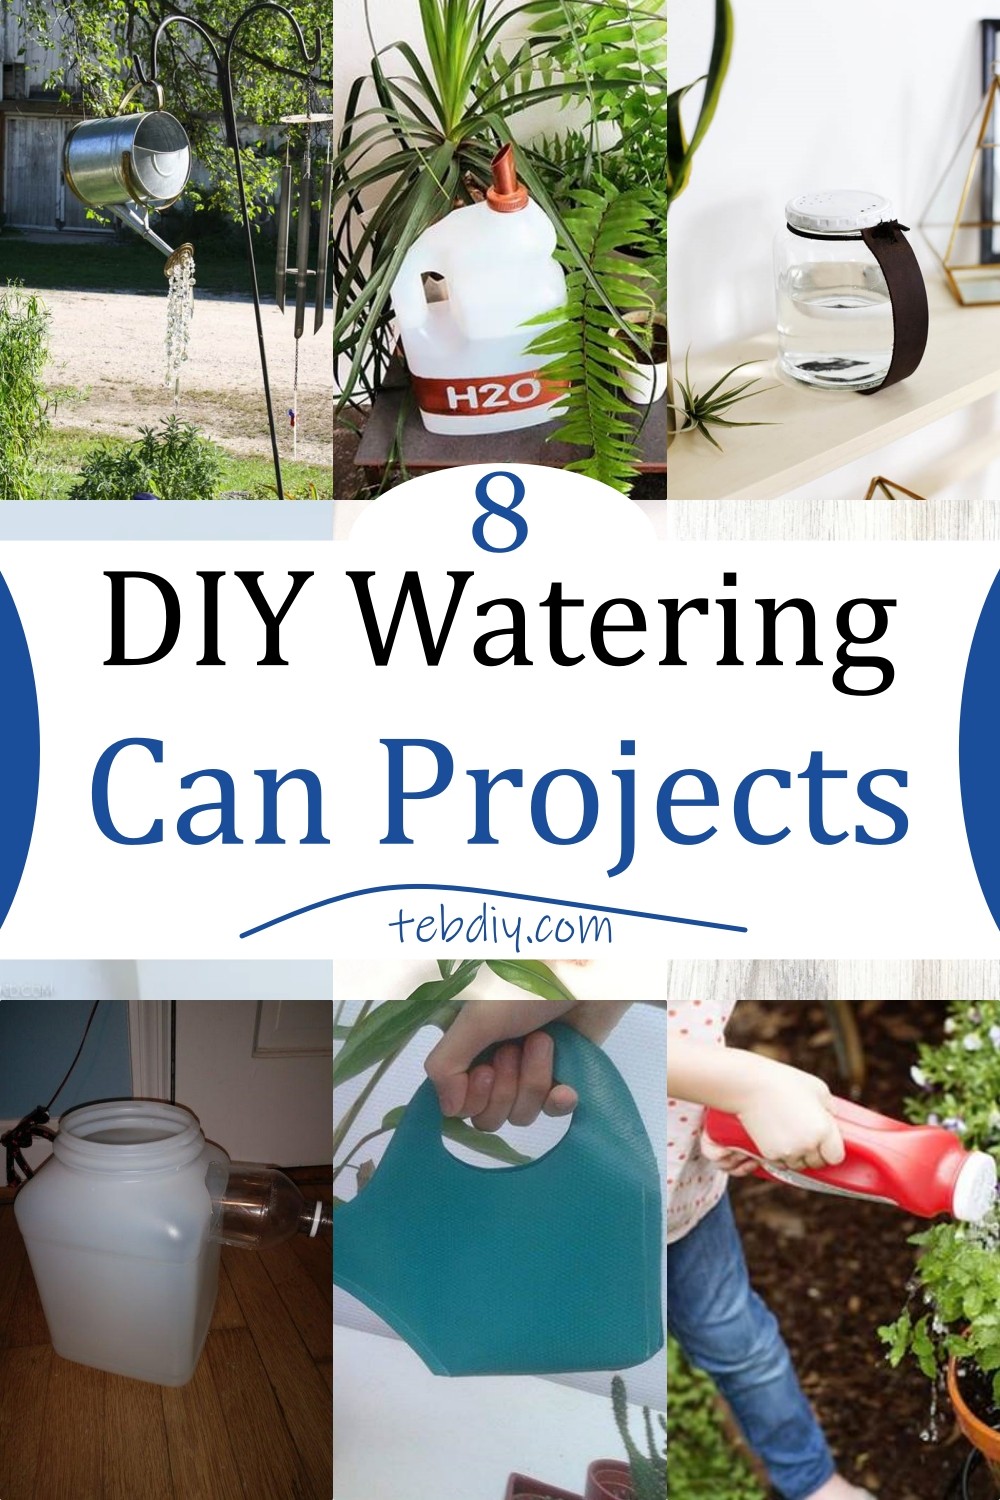 DIY Watering Can Projects